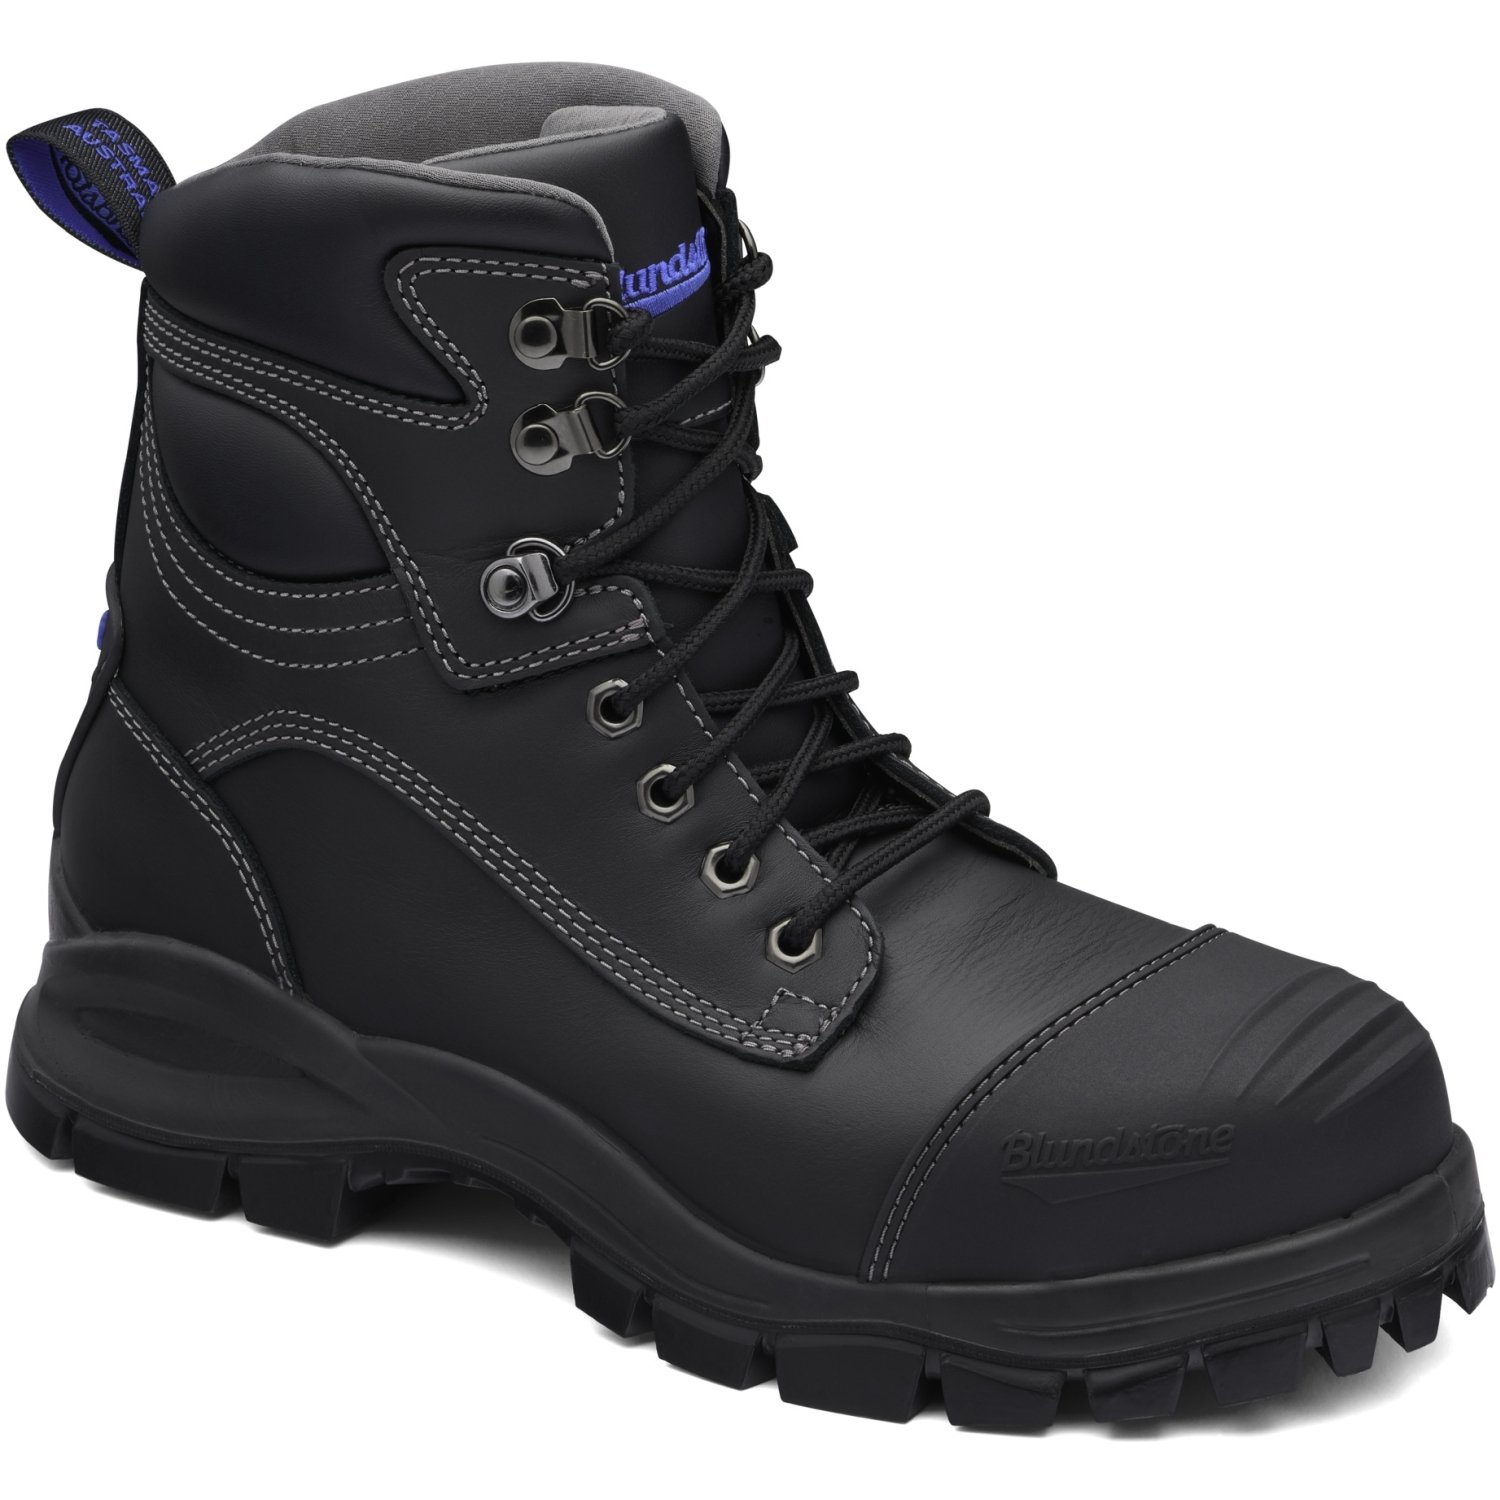 Blundstone 991 Nitrile Sole 300°C Lace Up Safety Boot With Scuff Cap Black